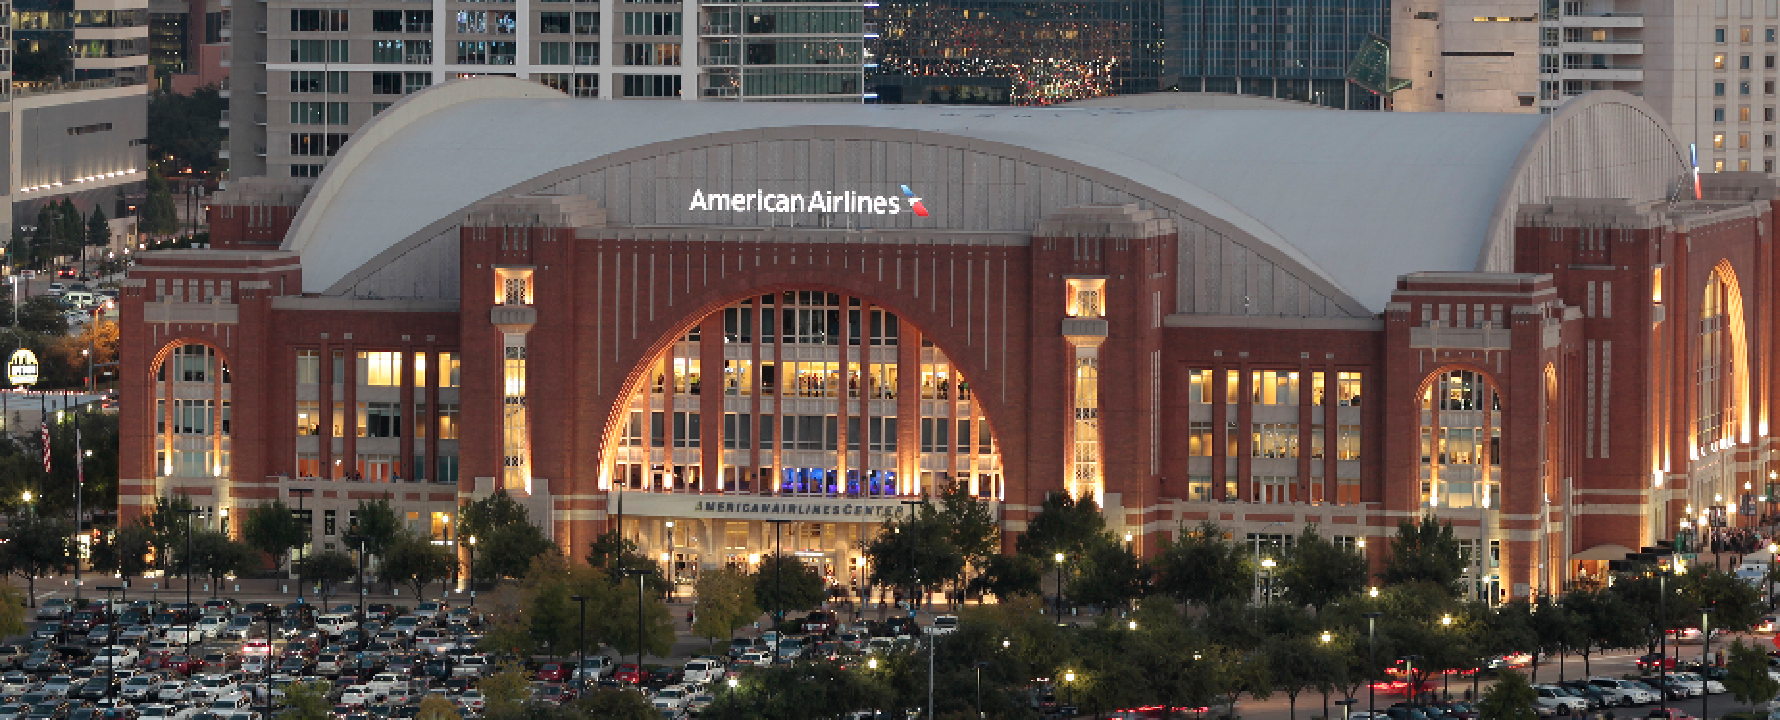 Promotional photograph of American Airlines Center.